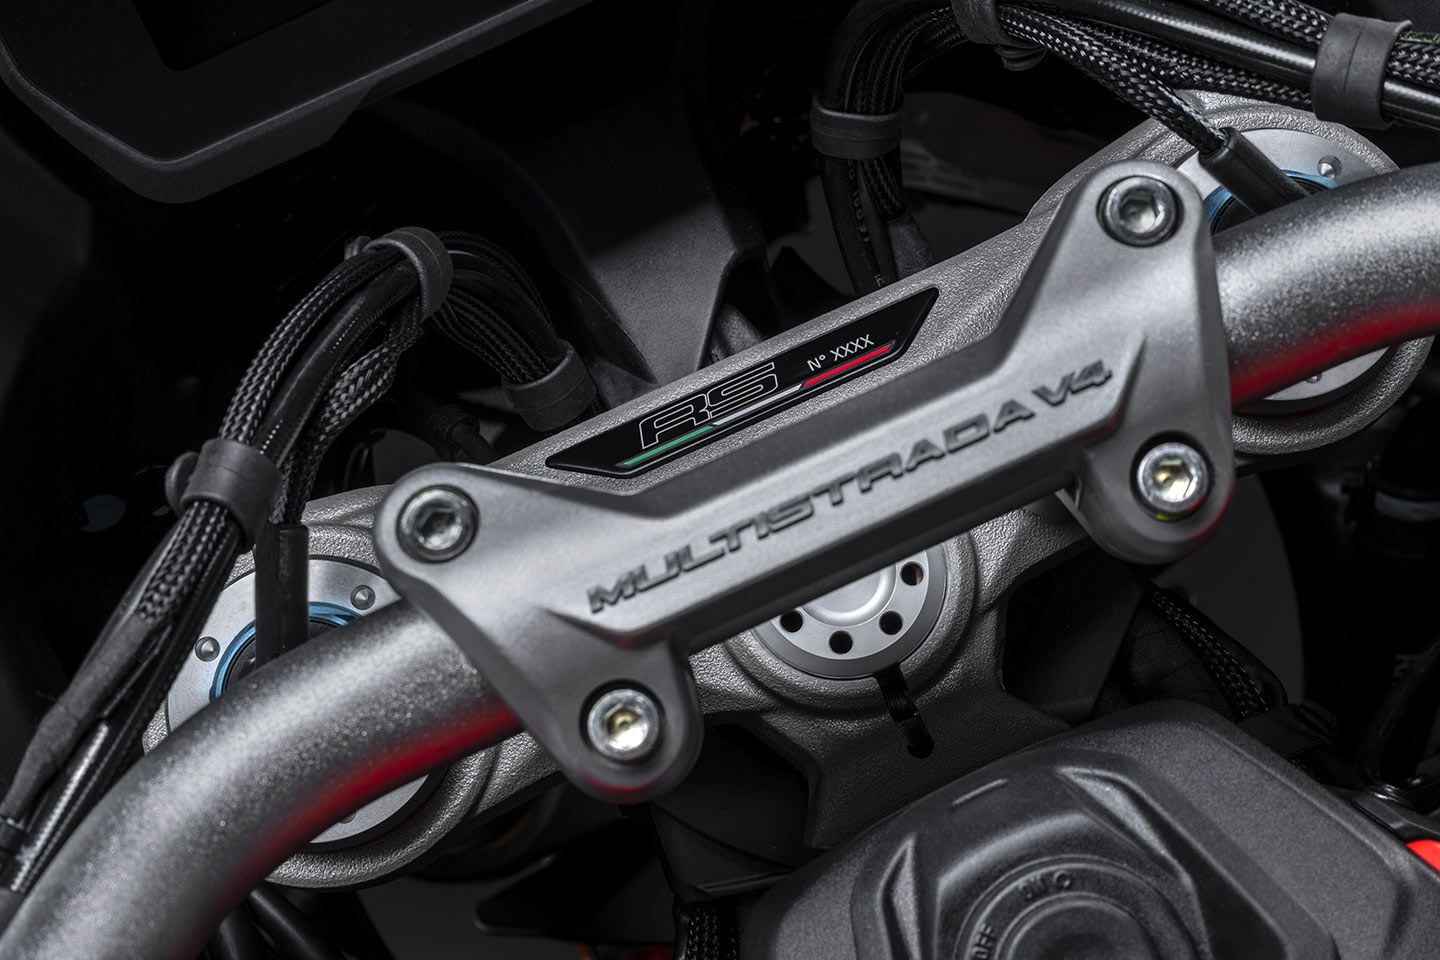 As a special edition, the Multistrada V4 RS will be numbered on the top triple clamp.